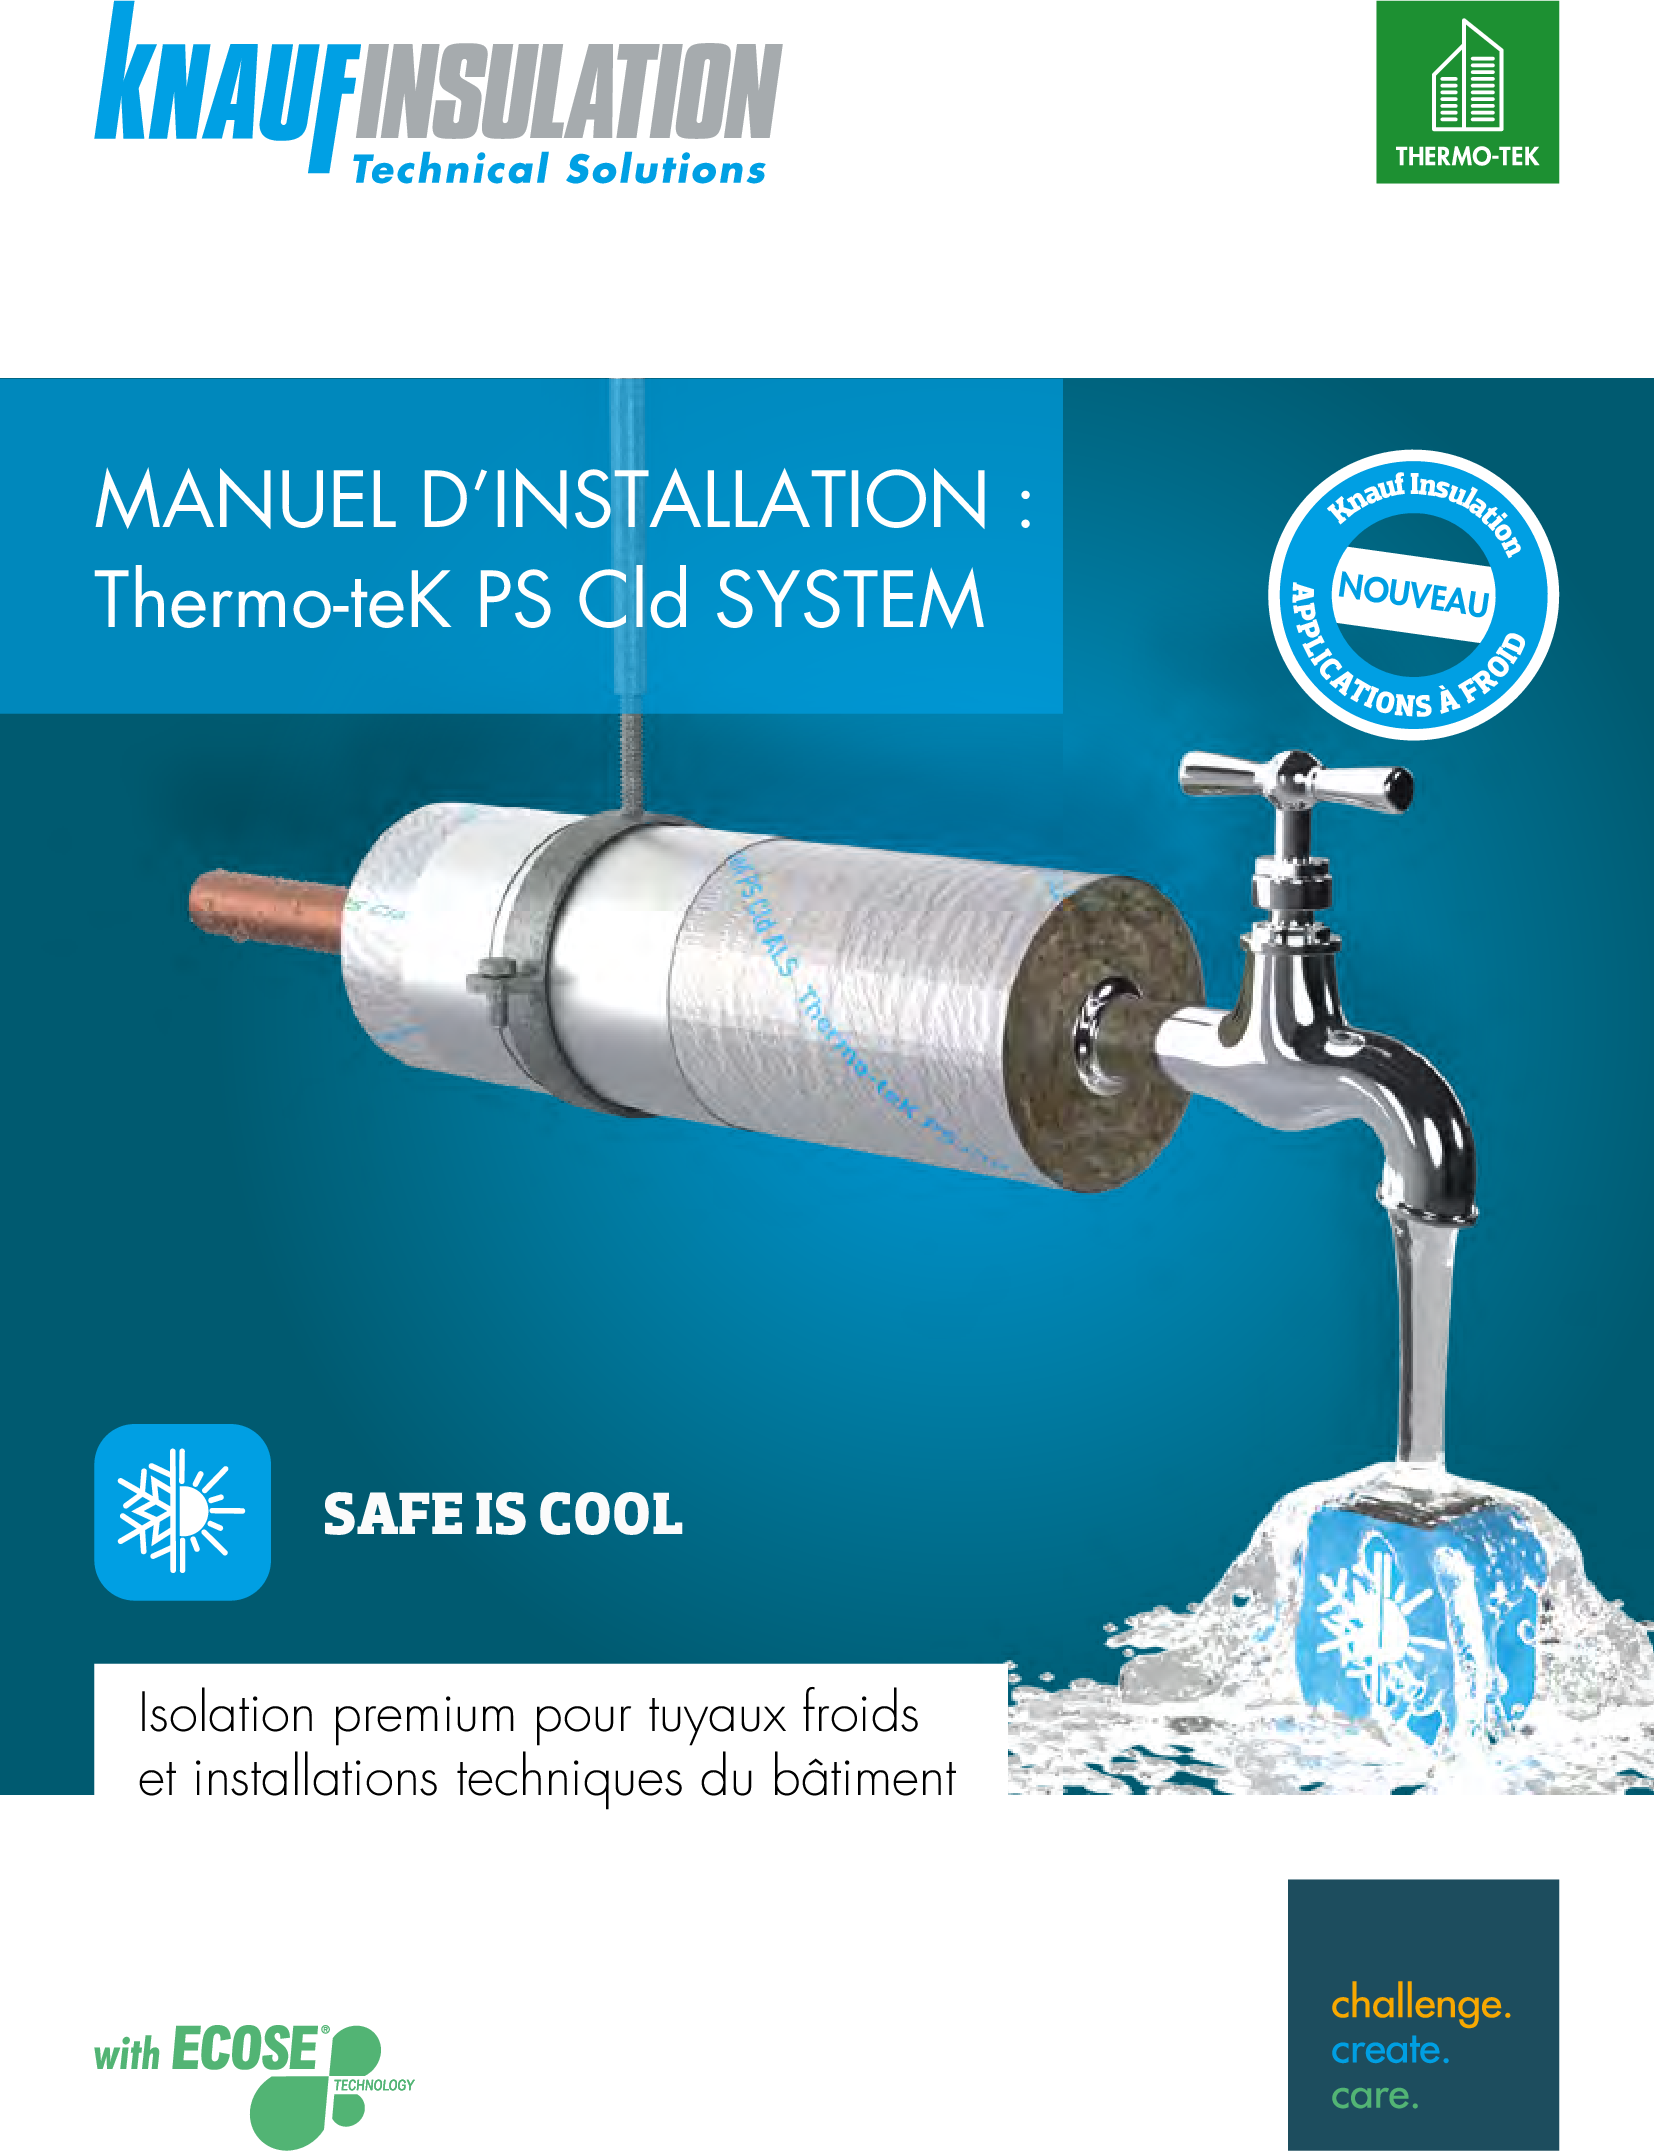 KITS Thermo-teK PS Cld SYSTEM manuel d'installation